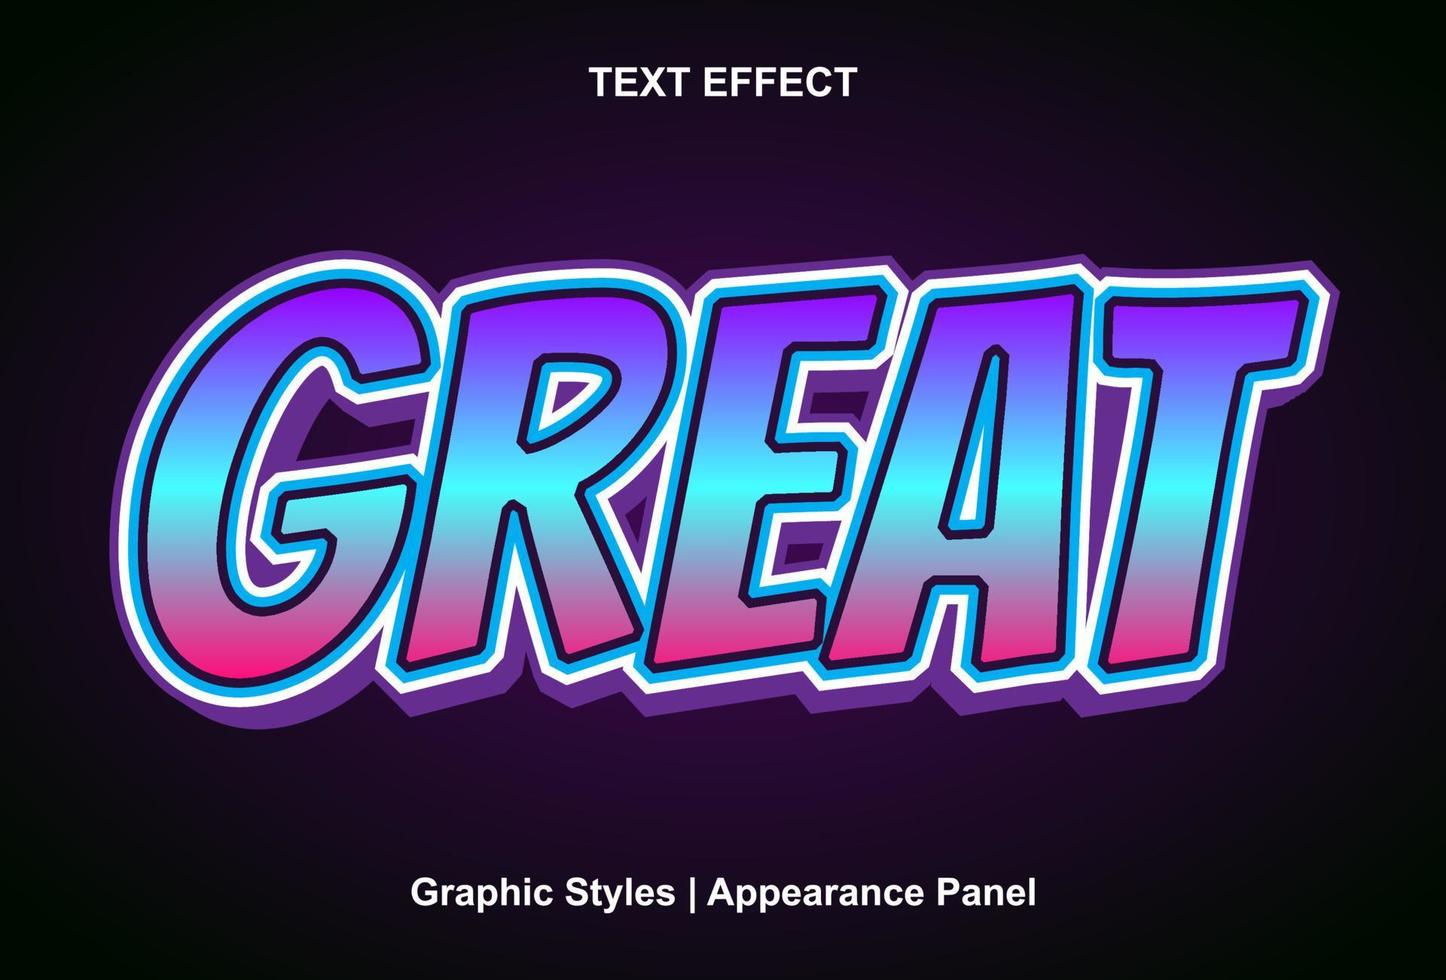 great text effects with graphic styles and can be edited. vector